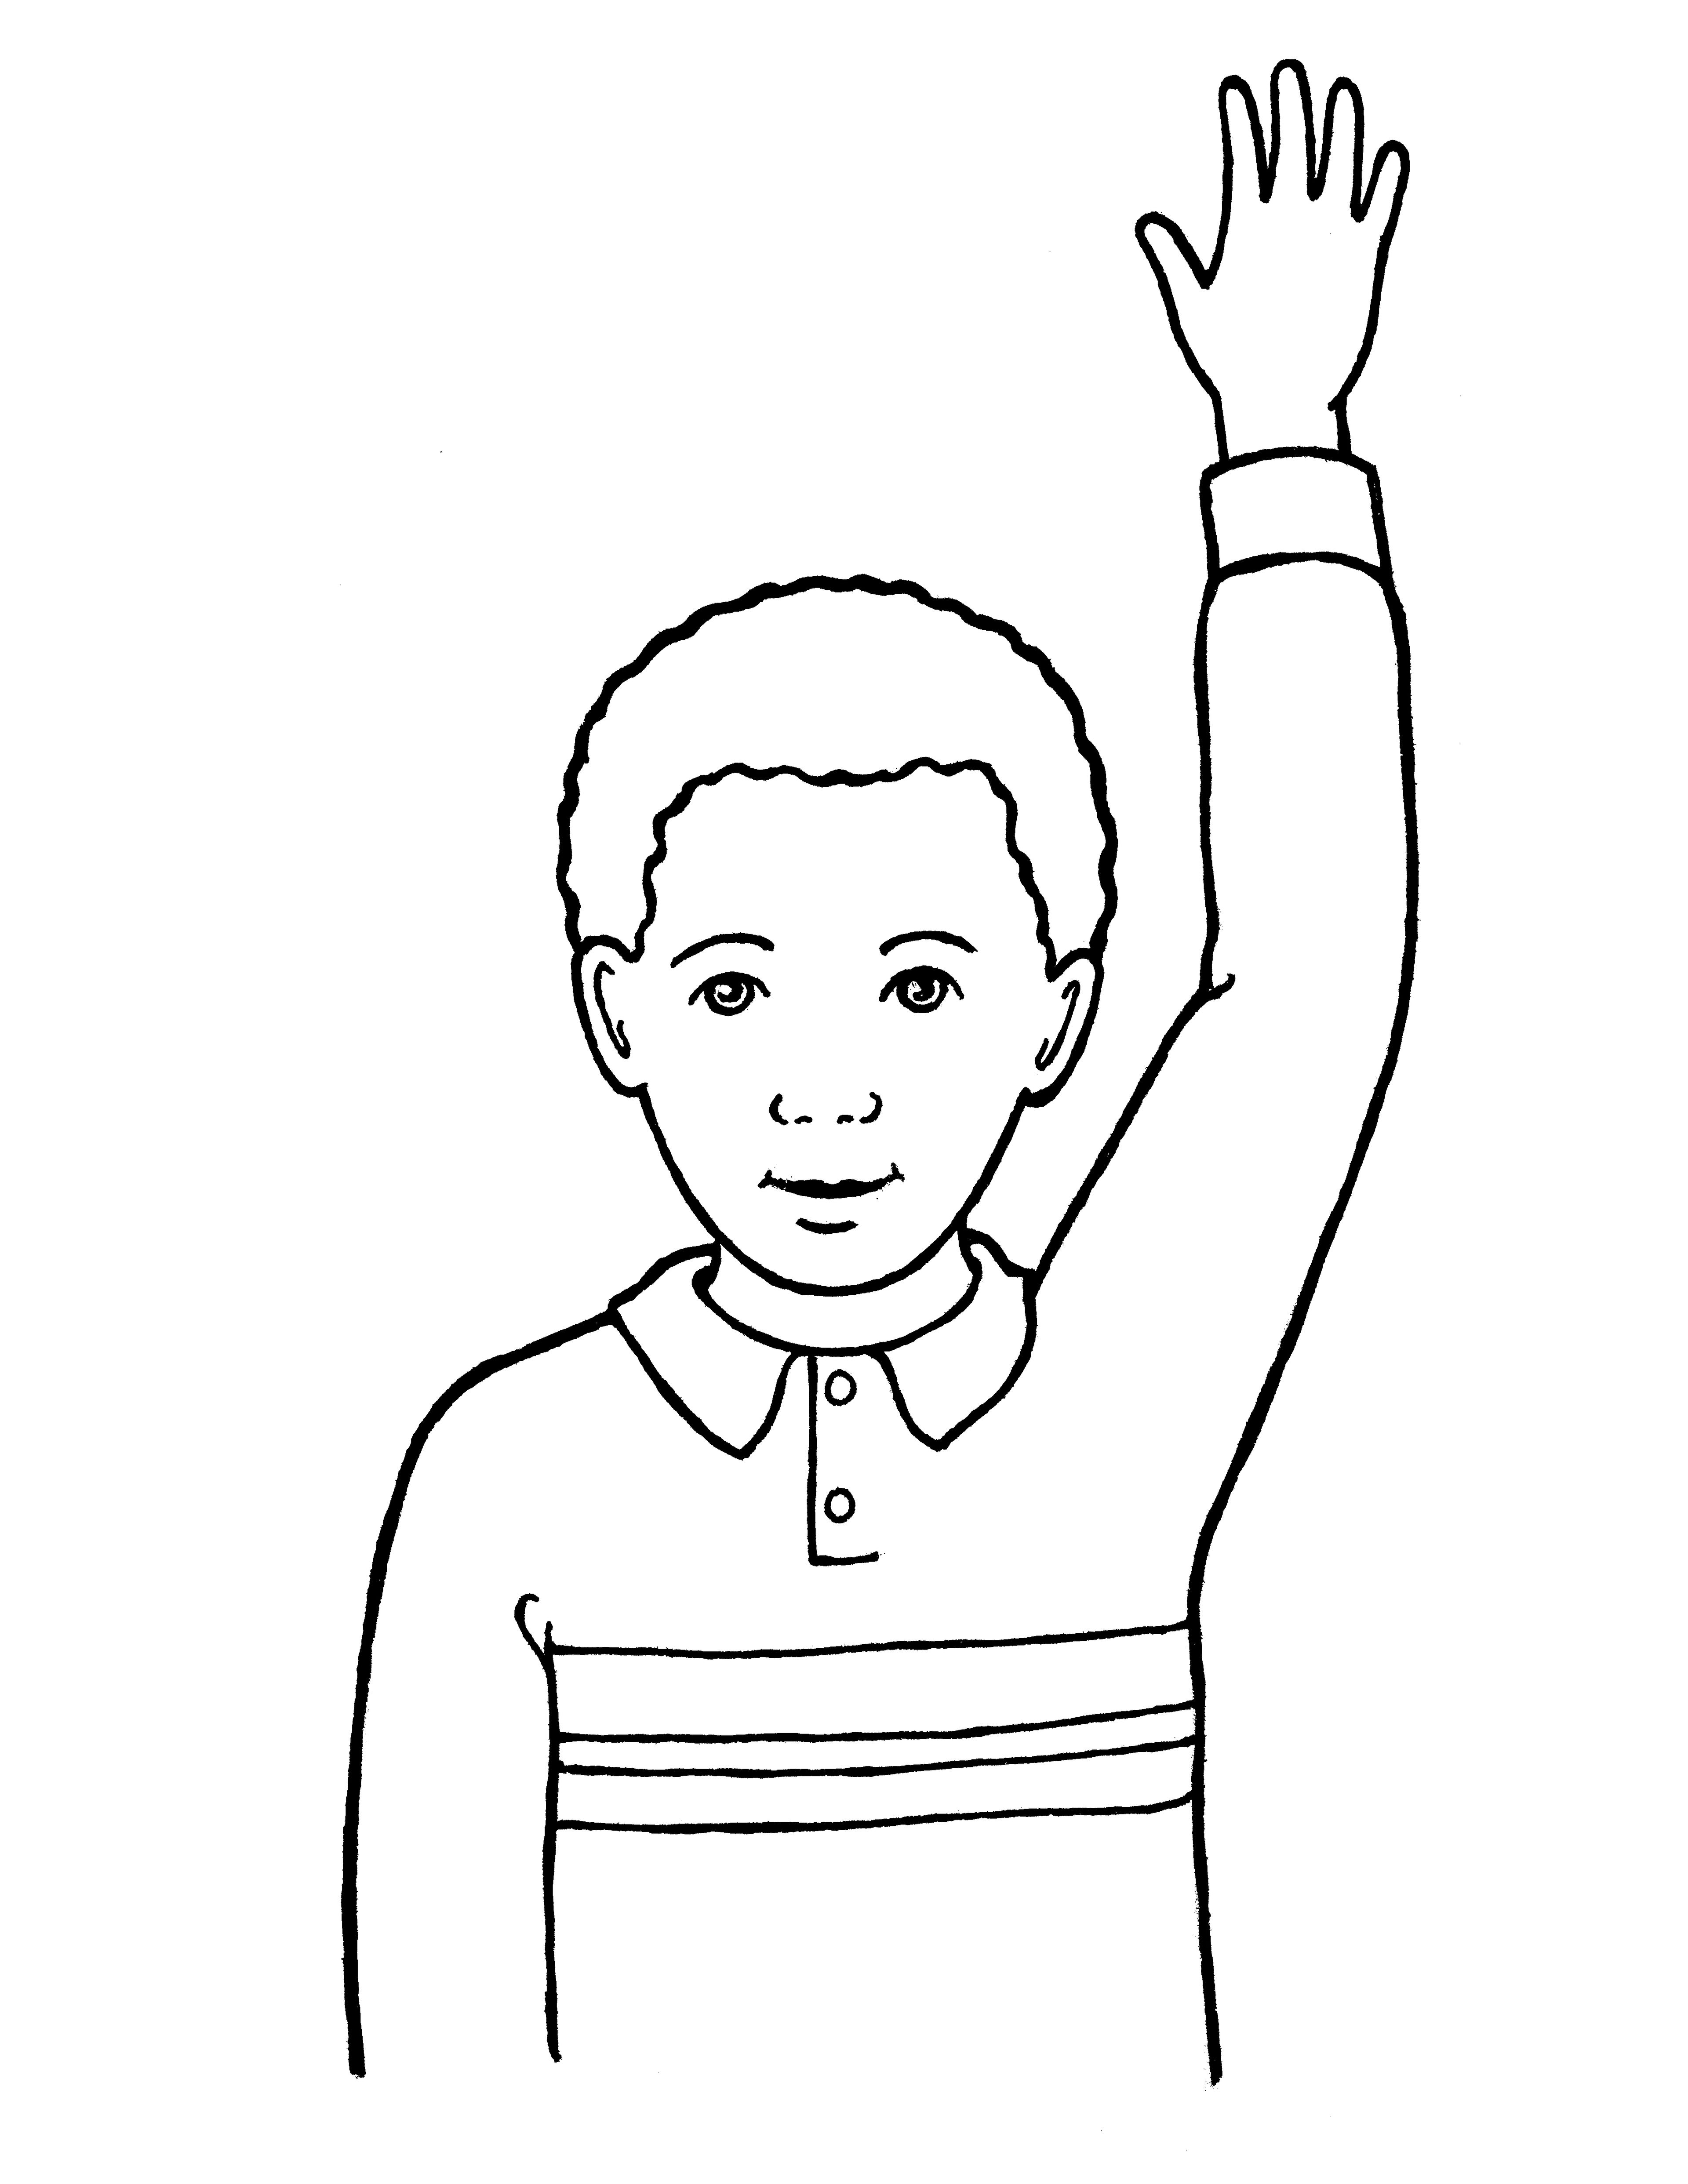 An illustration of a young boy reverently raising his hand.